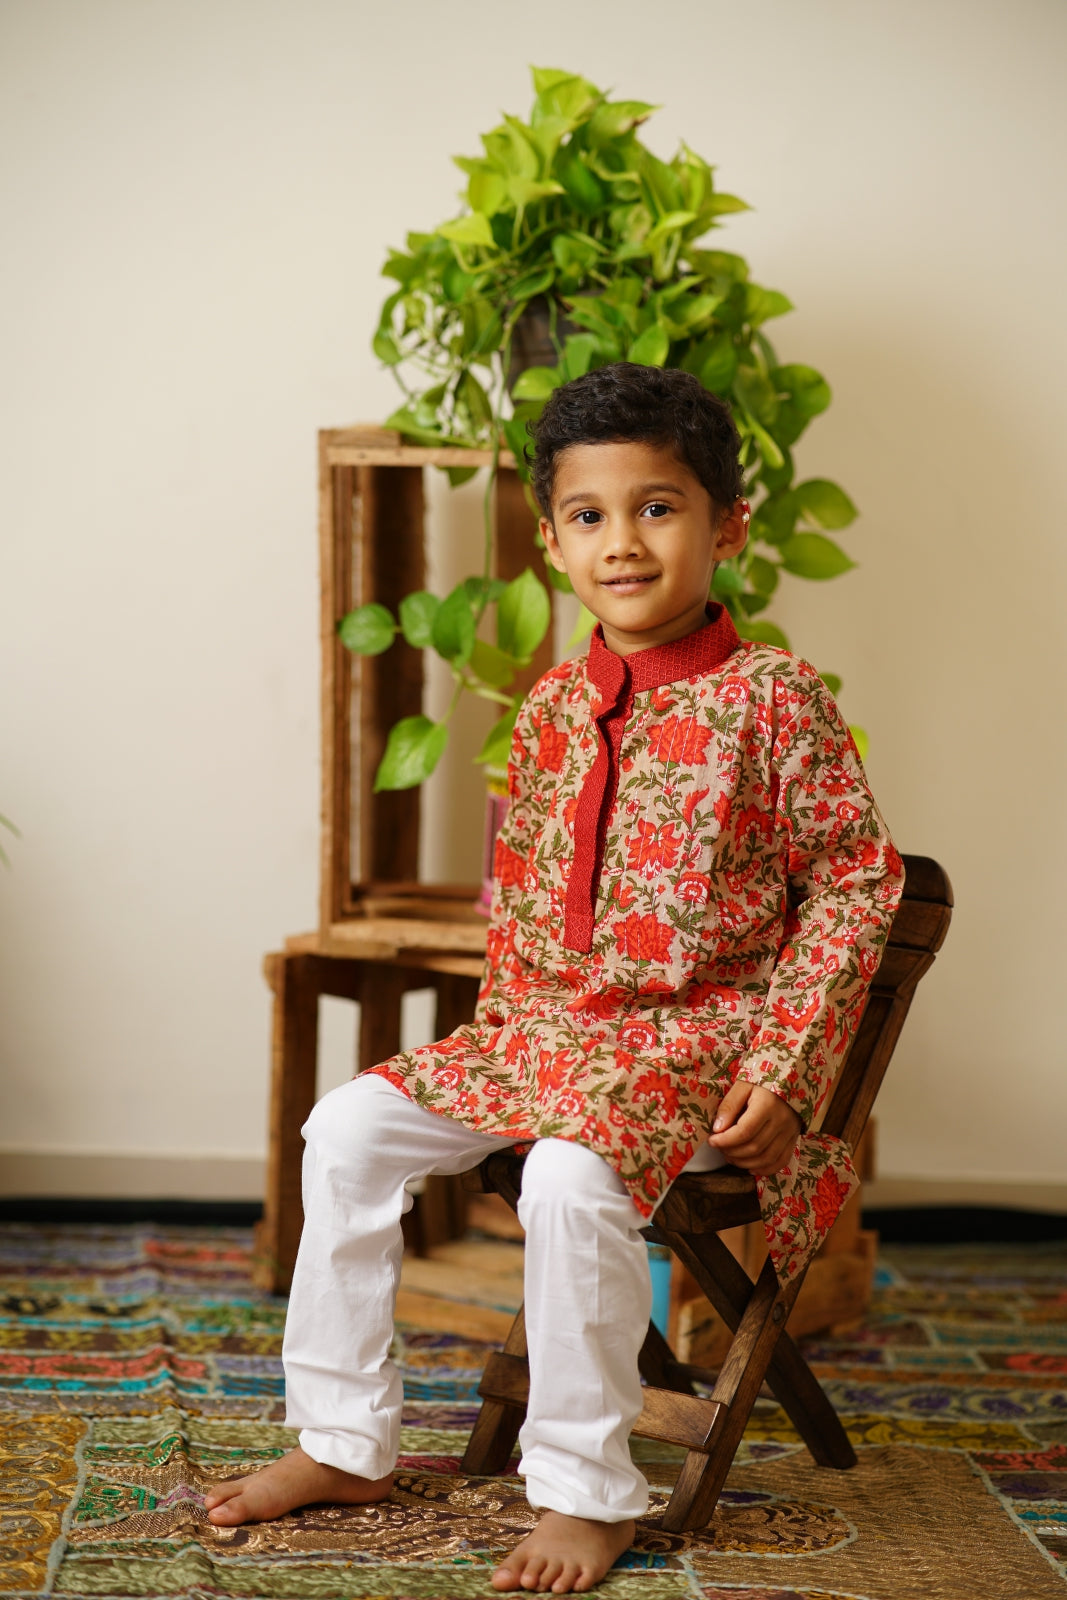 Sanganeri Cotton block printed Stand Collar Kurta with silver jari weaved lines.Kurtas with collar or Angrakha pattern teamed with salwar are the best choice for any festive occasion for boys.They are Trendy, Easy to wear and comfortable to carry.